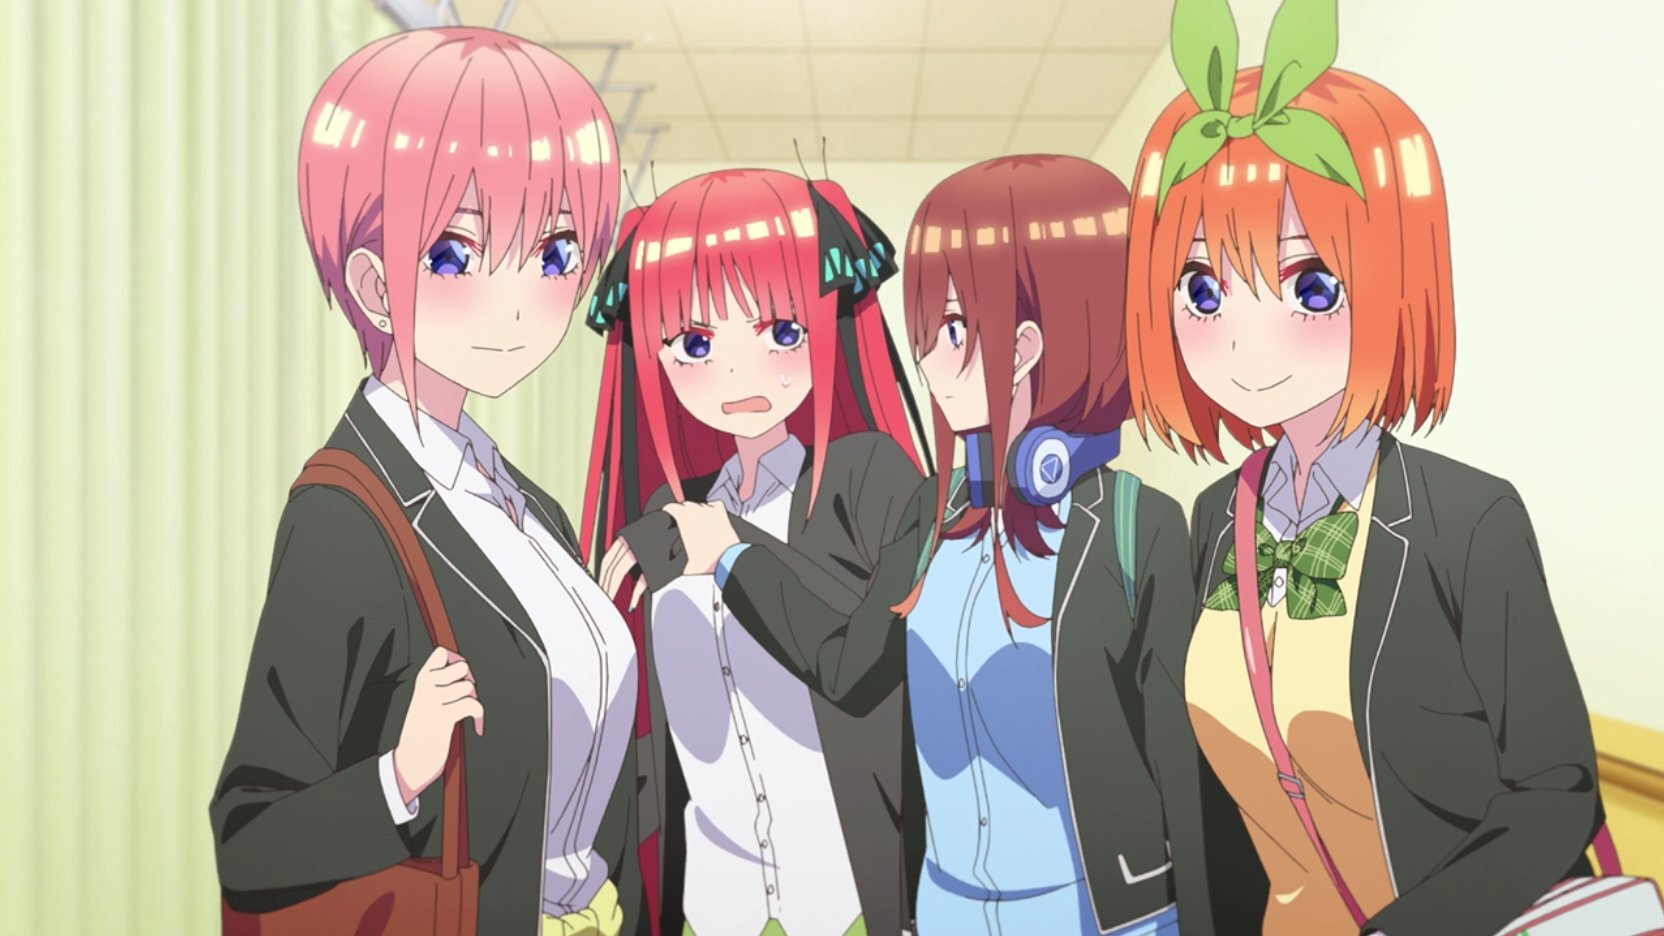 Crunchyroll - Crunchyroll Announces July 2022 Home Video Releases,  Including The Quintessential Quintuplets 2